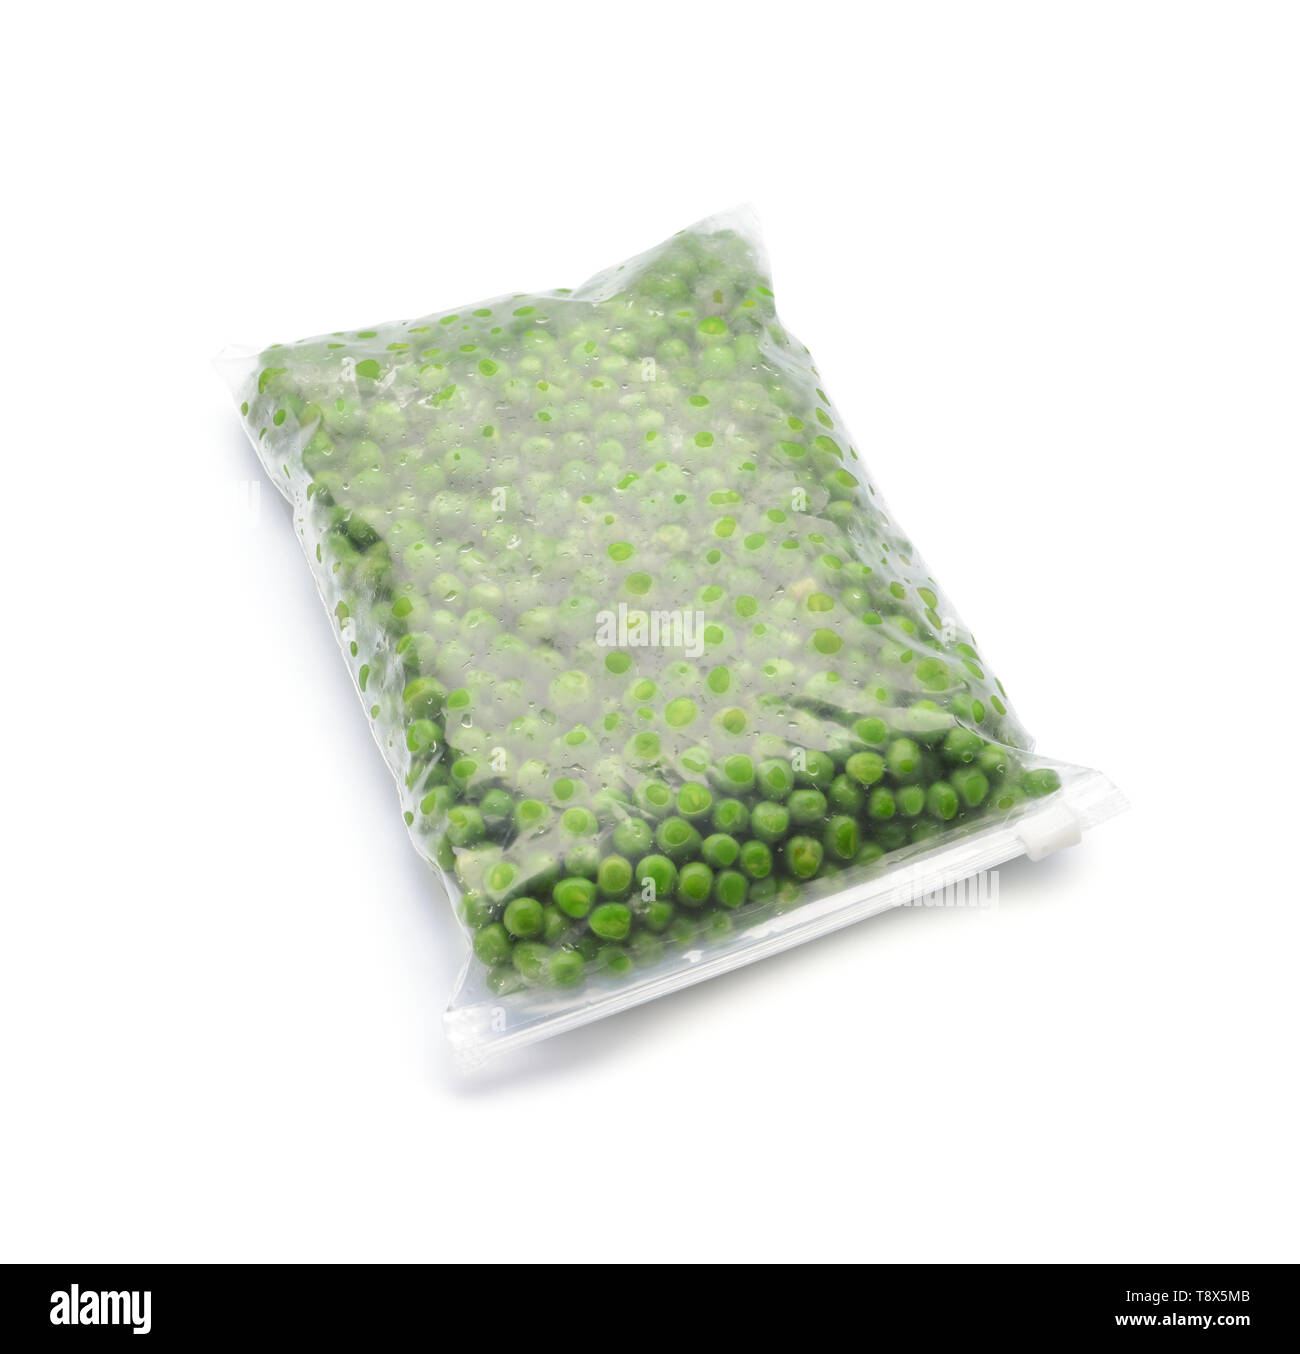 Download Plastic Bag With Frozen Green Peas On White Background Stock Photo Alamy Yellowimages Mockups